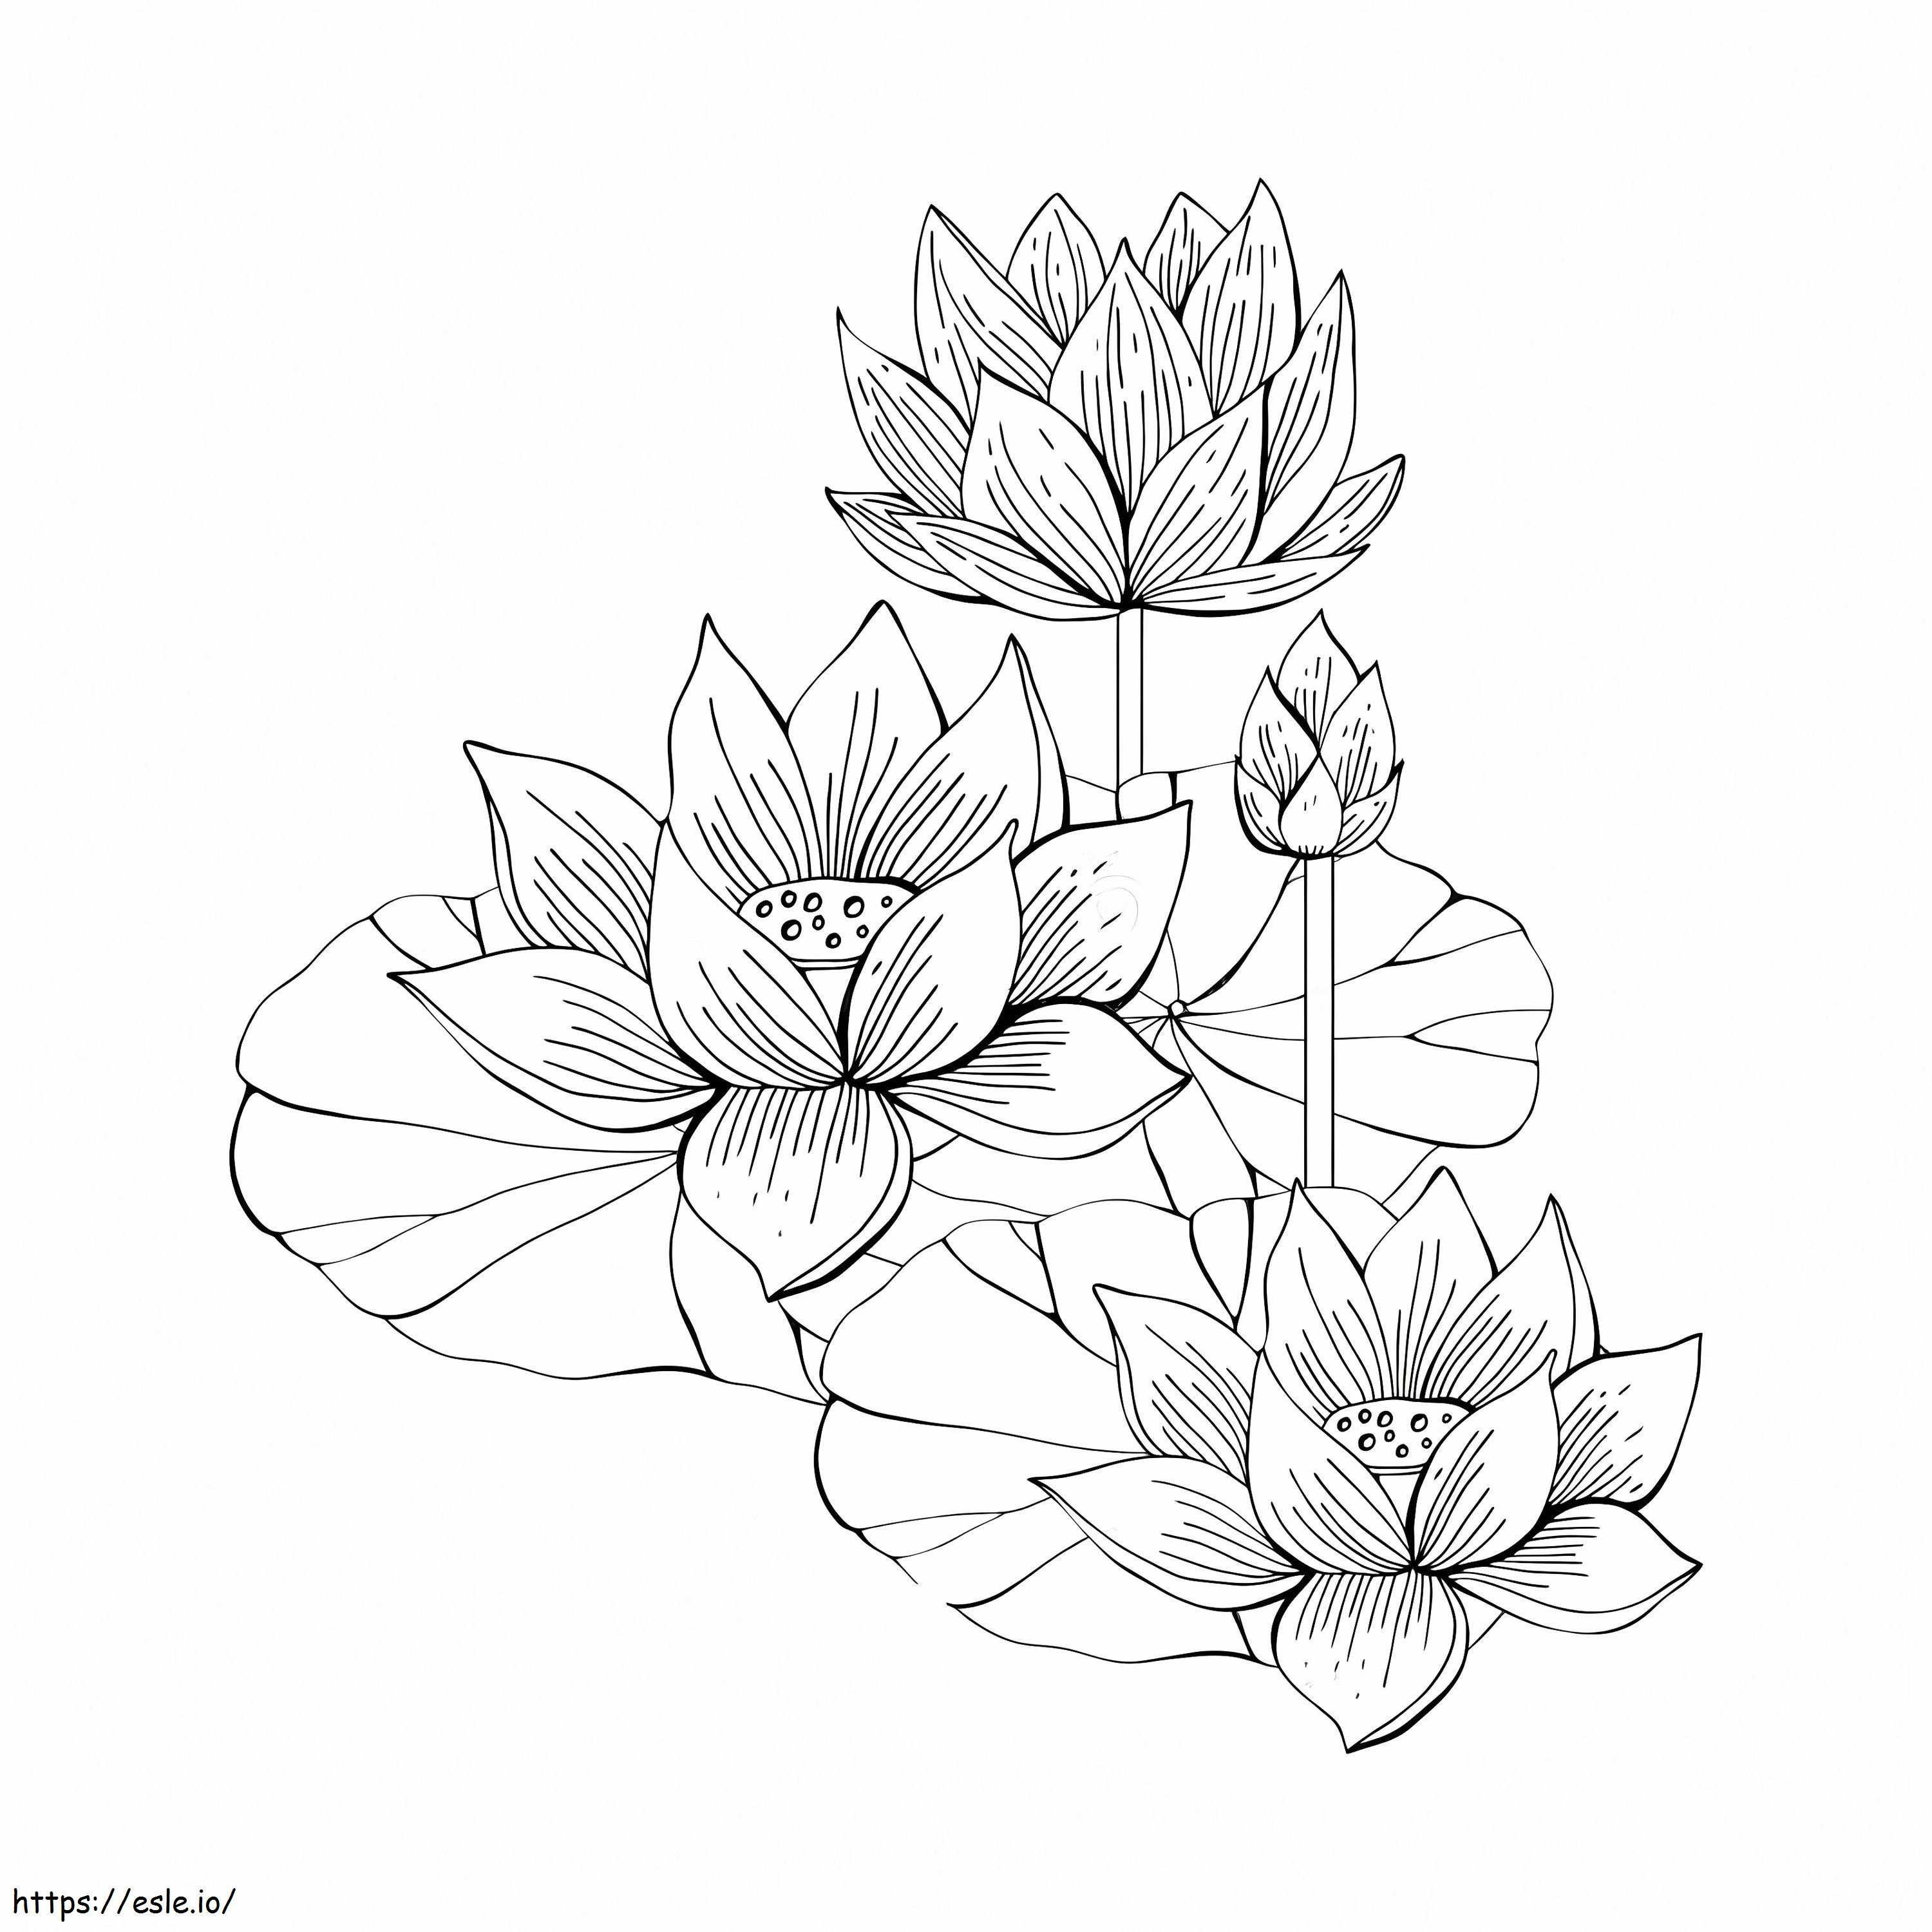 Four Lotto coloring page